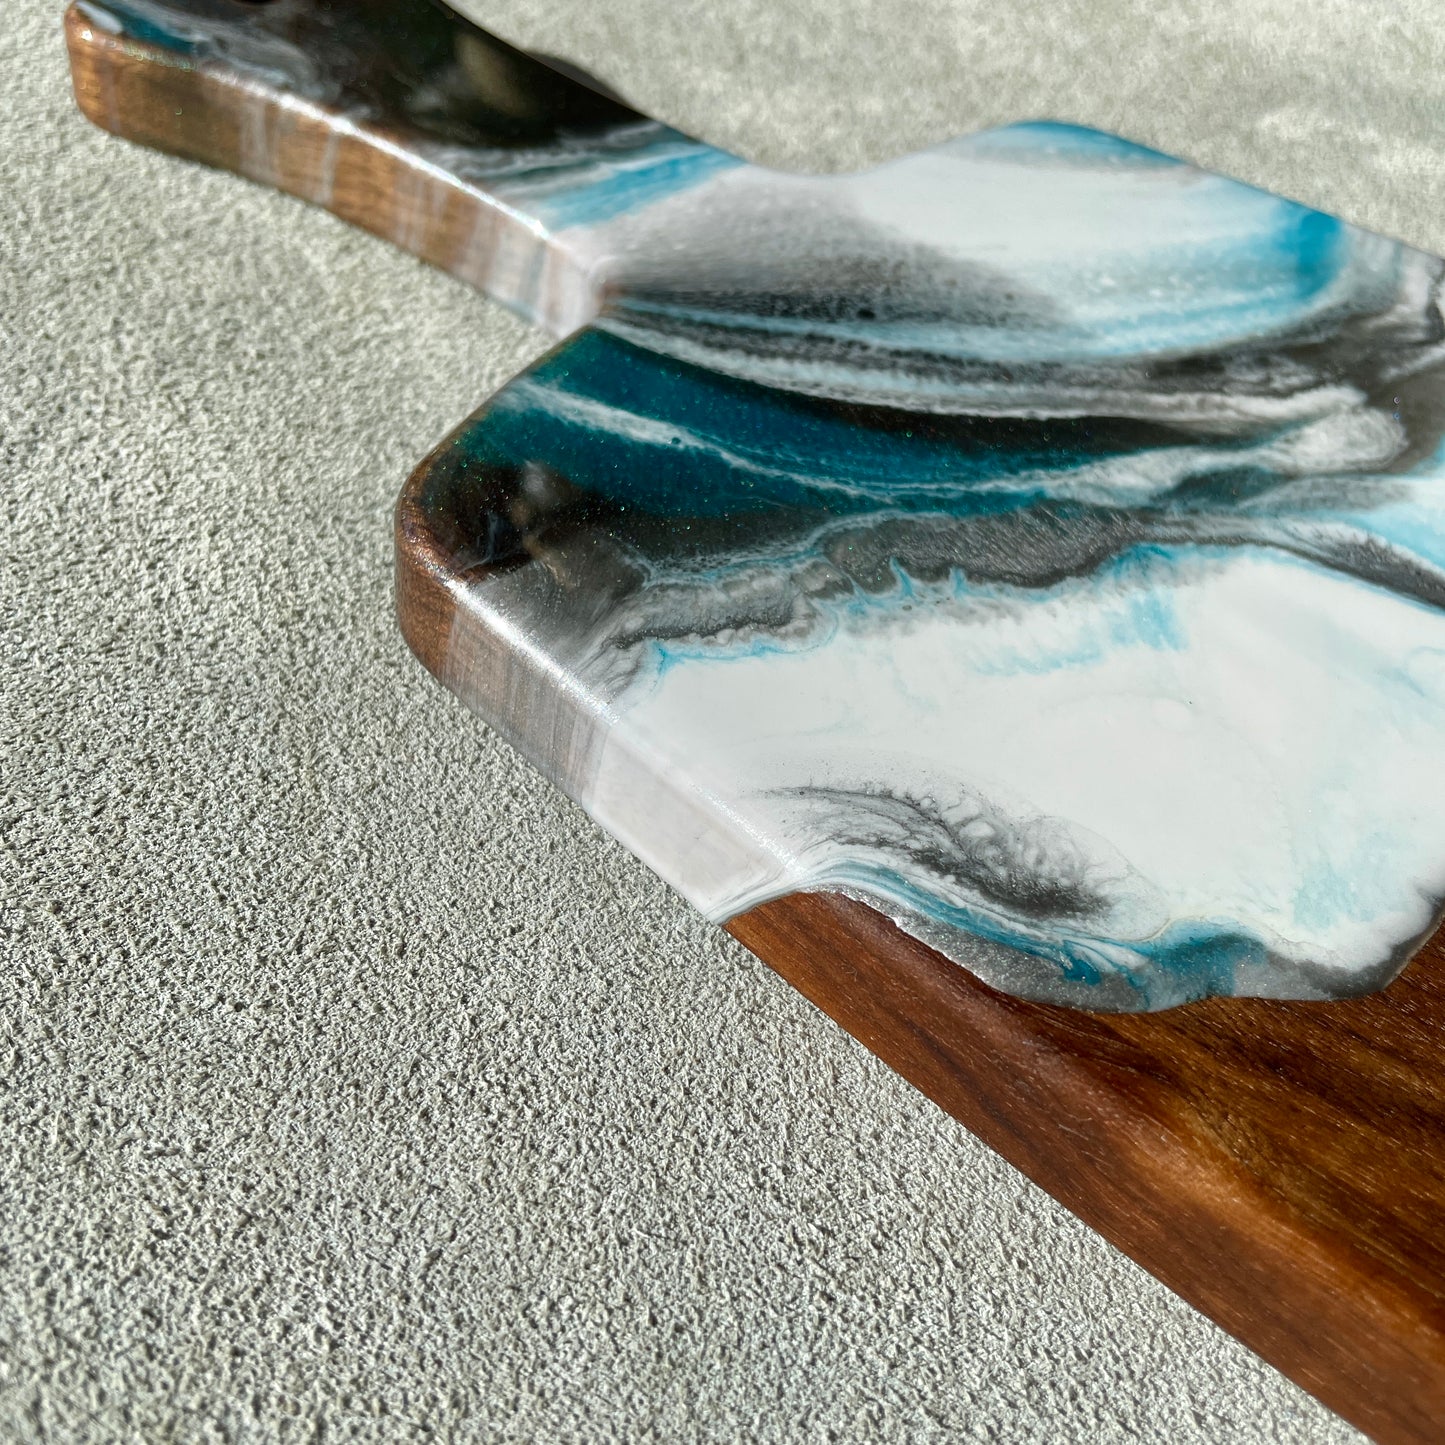 Artisan Walnut Cutting Board with Teal and Gray Resin Art Handle